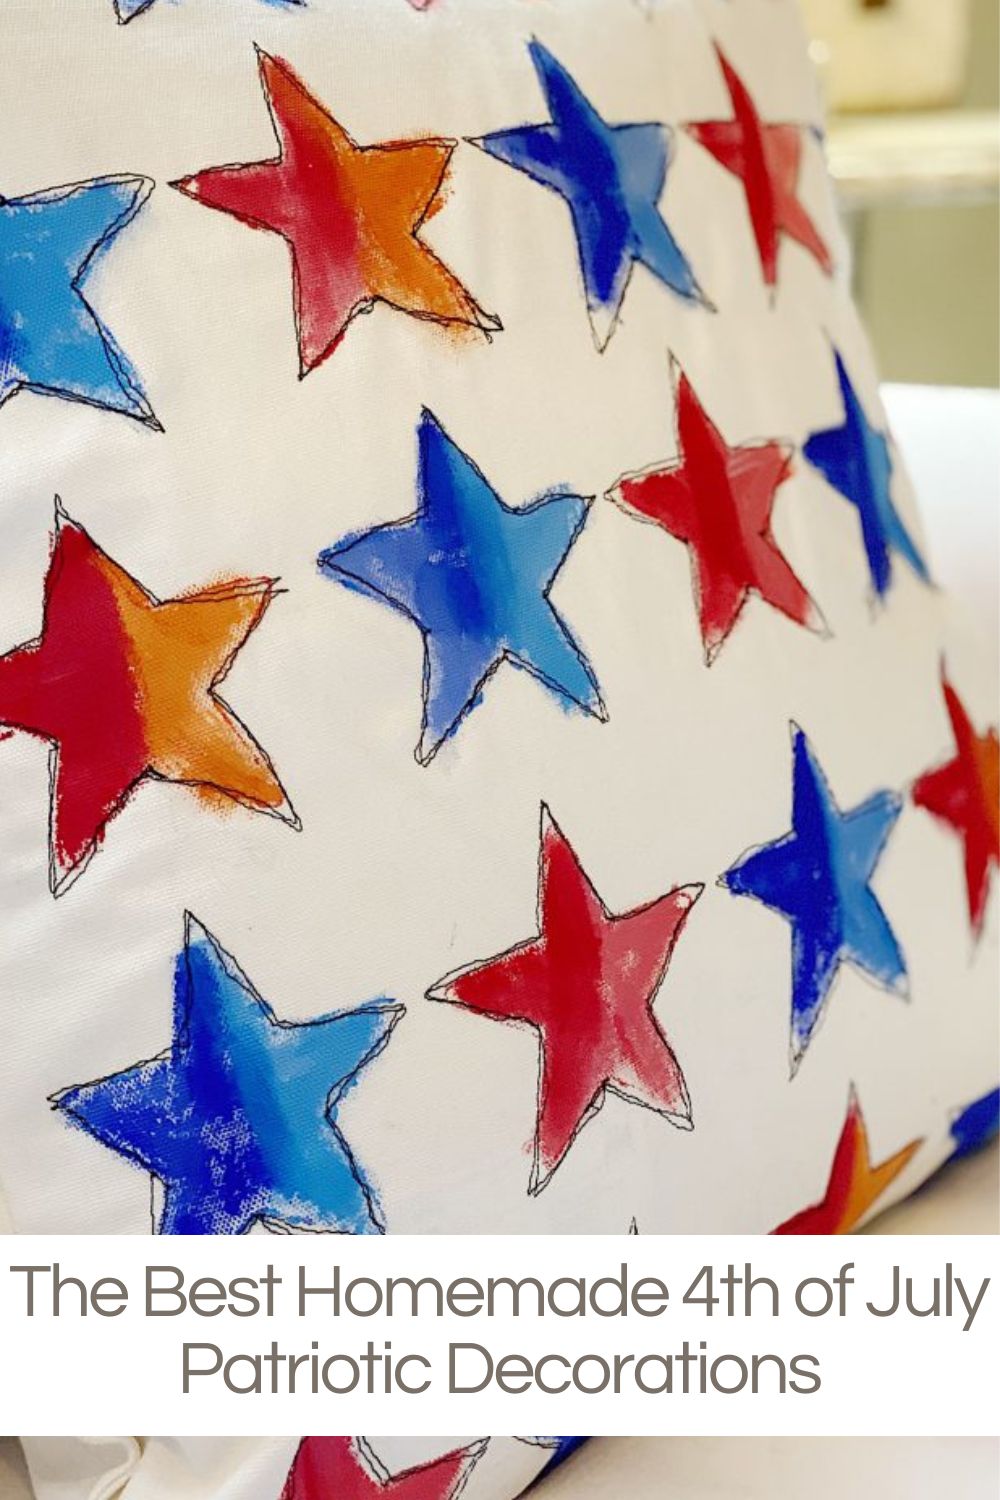 I love the 4th of July, and I wanted more patriotic decorations for our home. So I made this pillow with stars and machine embroidery!